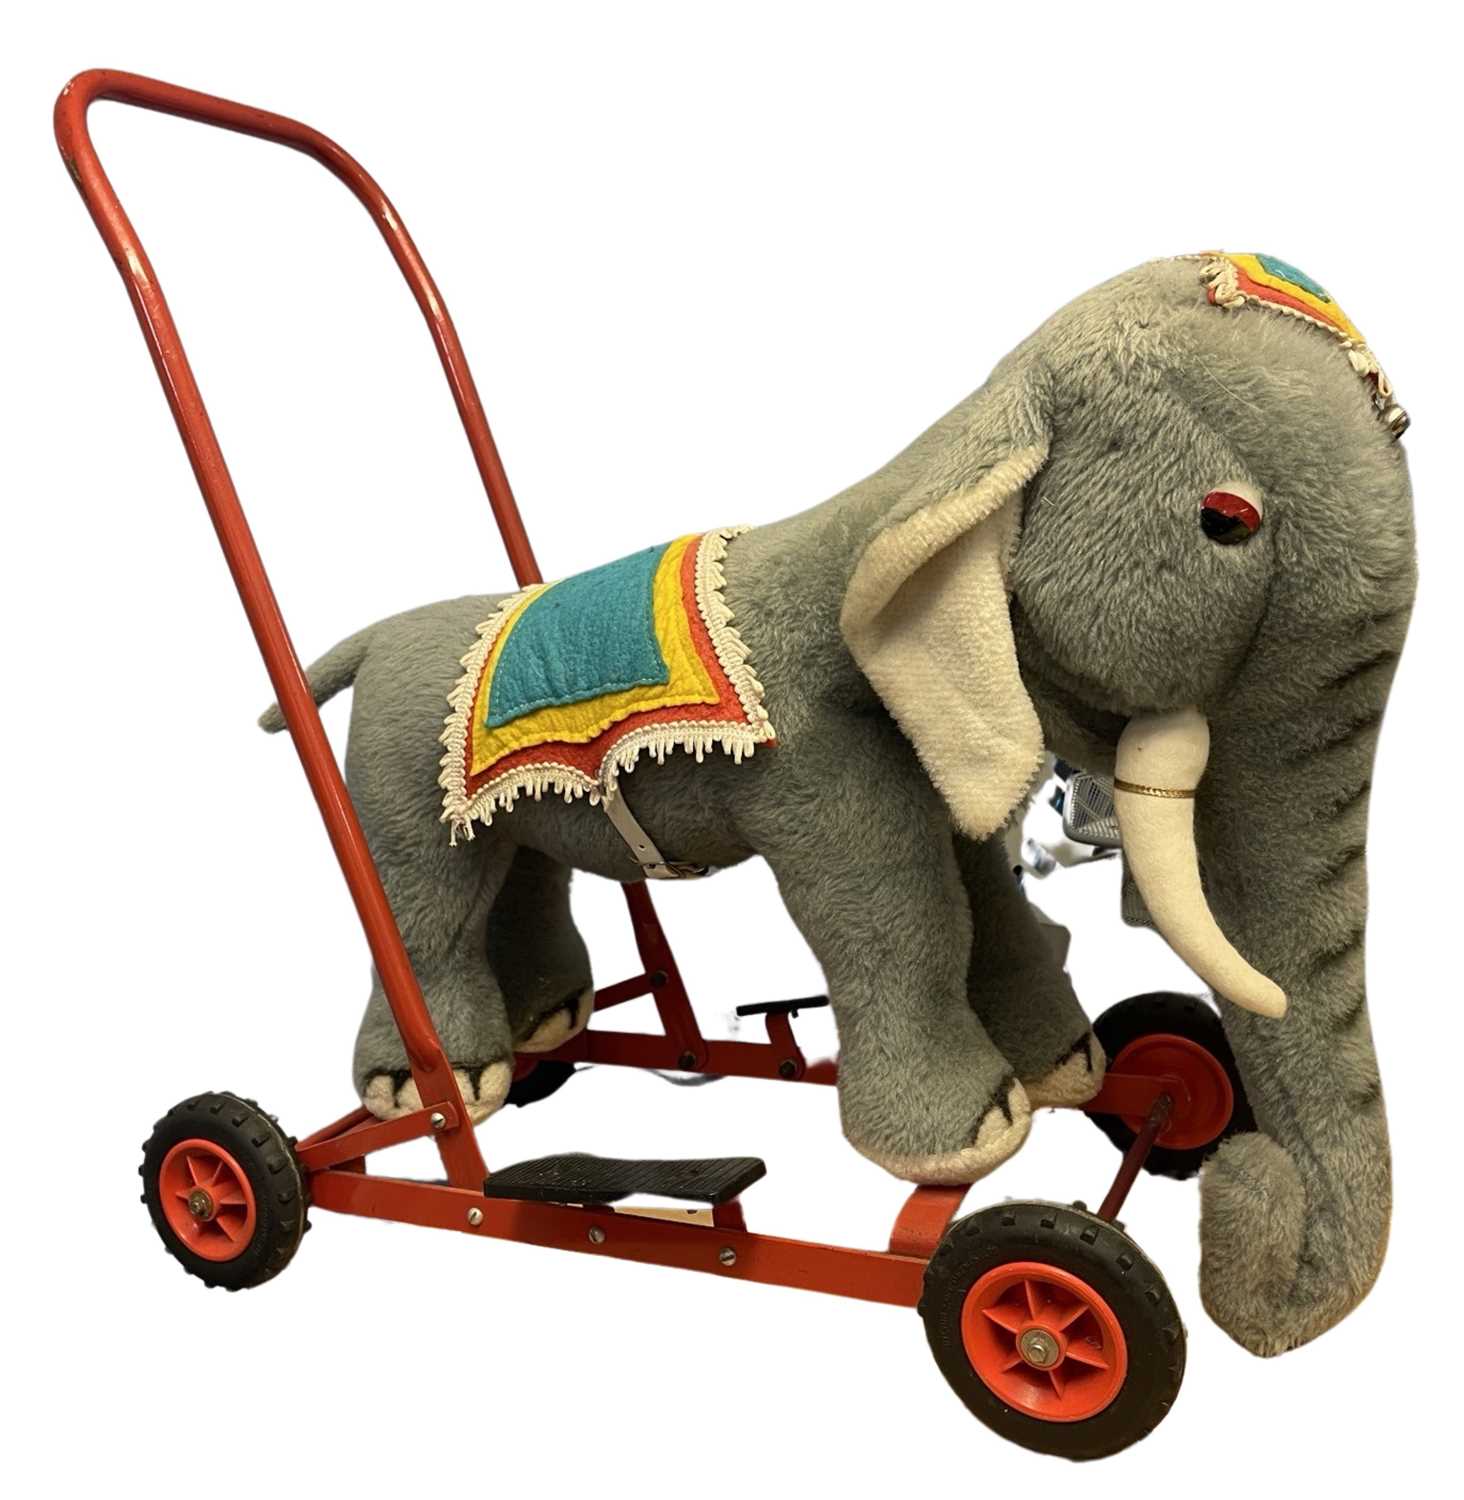 A vintage Merrythought walker / ride-on elephant, with original ironmongery and saddle